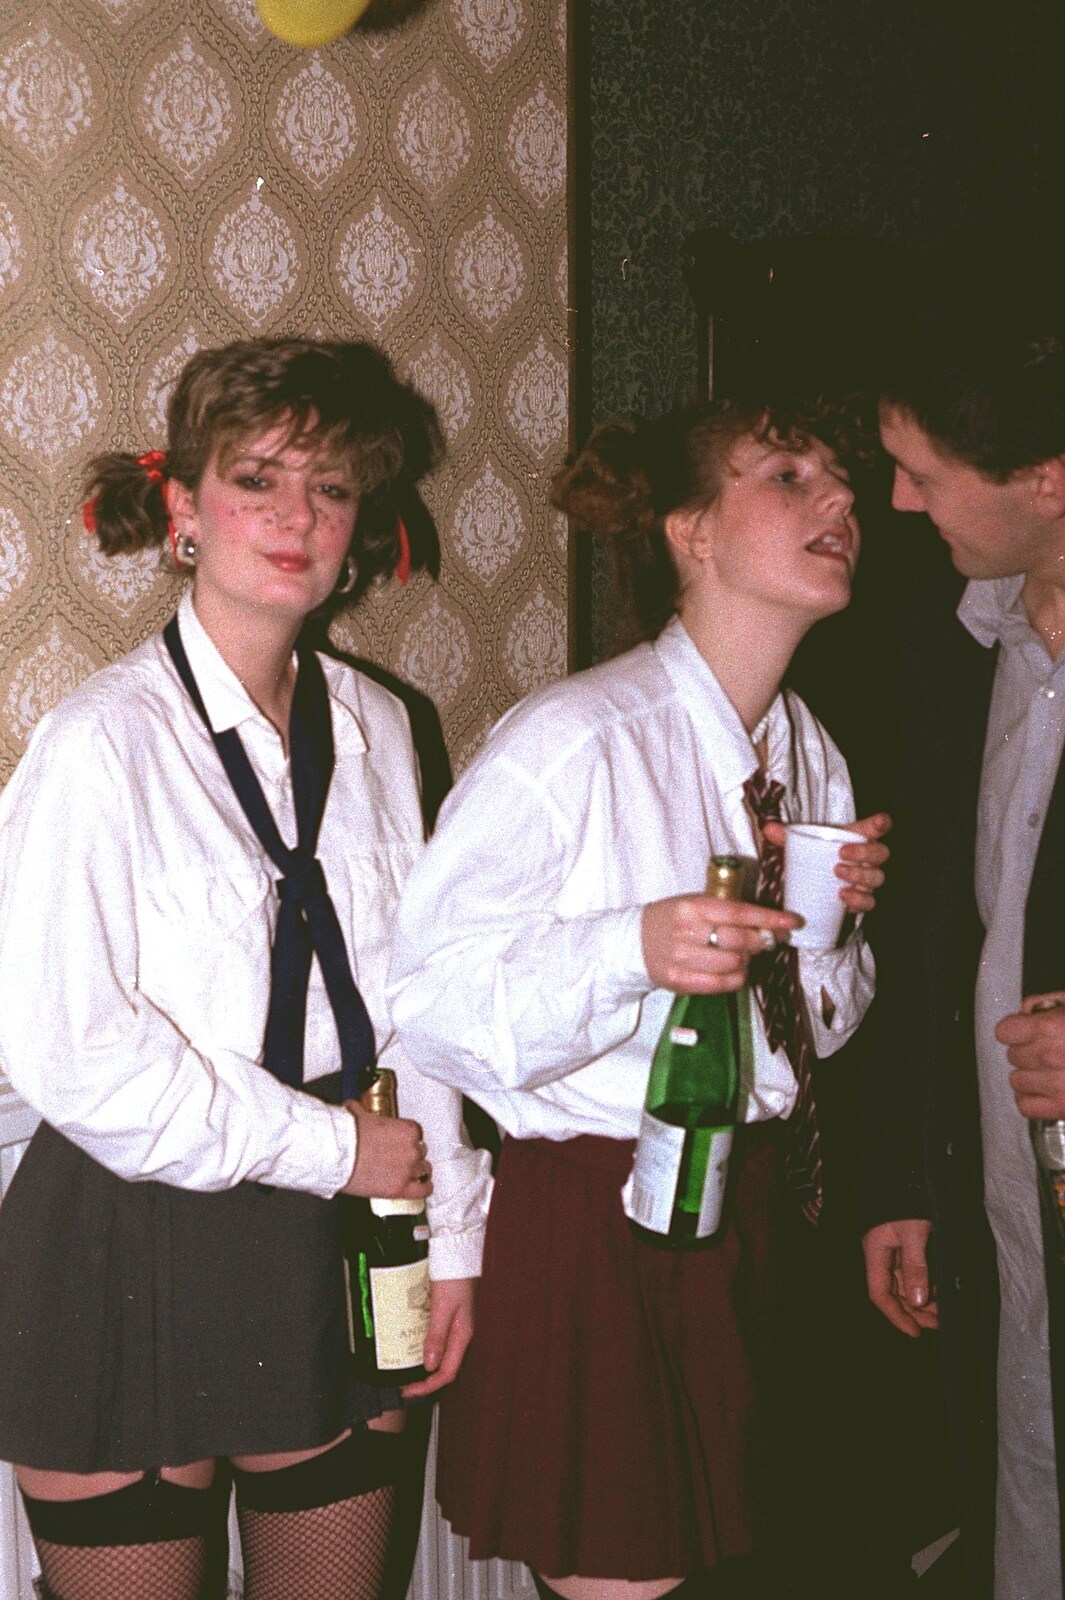 80s schoolgirls (not really) from Uni: Simon Read's Party, North Road East, Plymouth - 10th October 1986